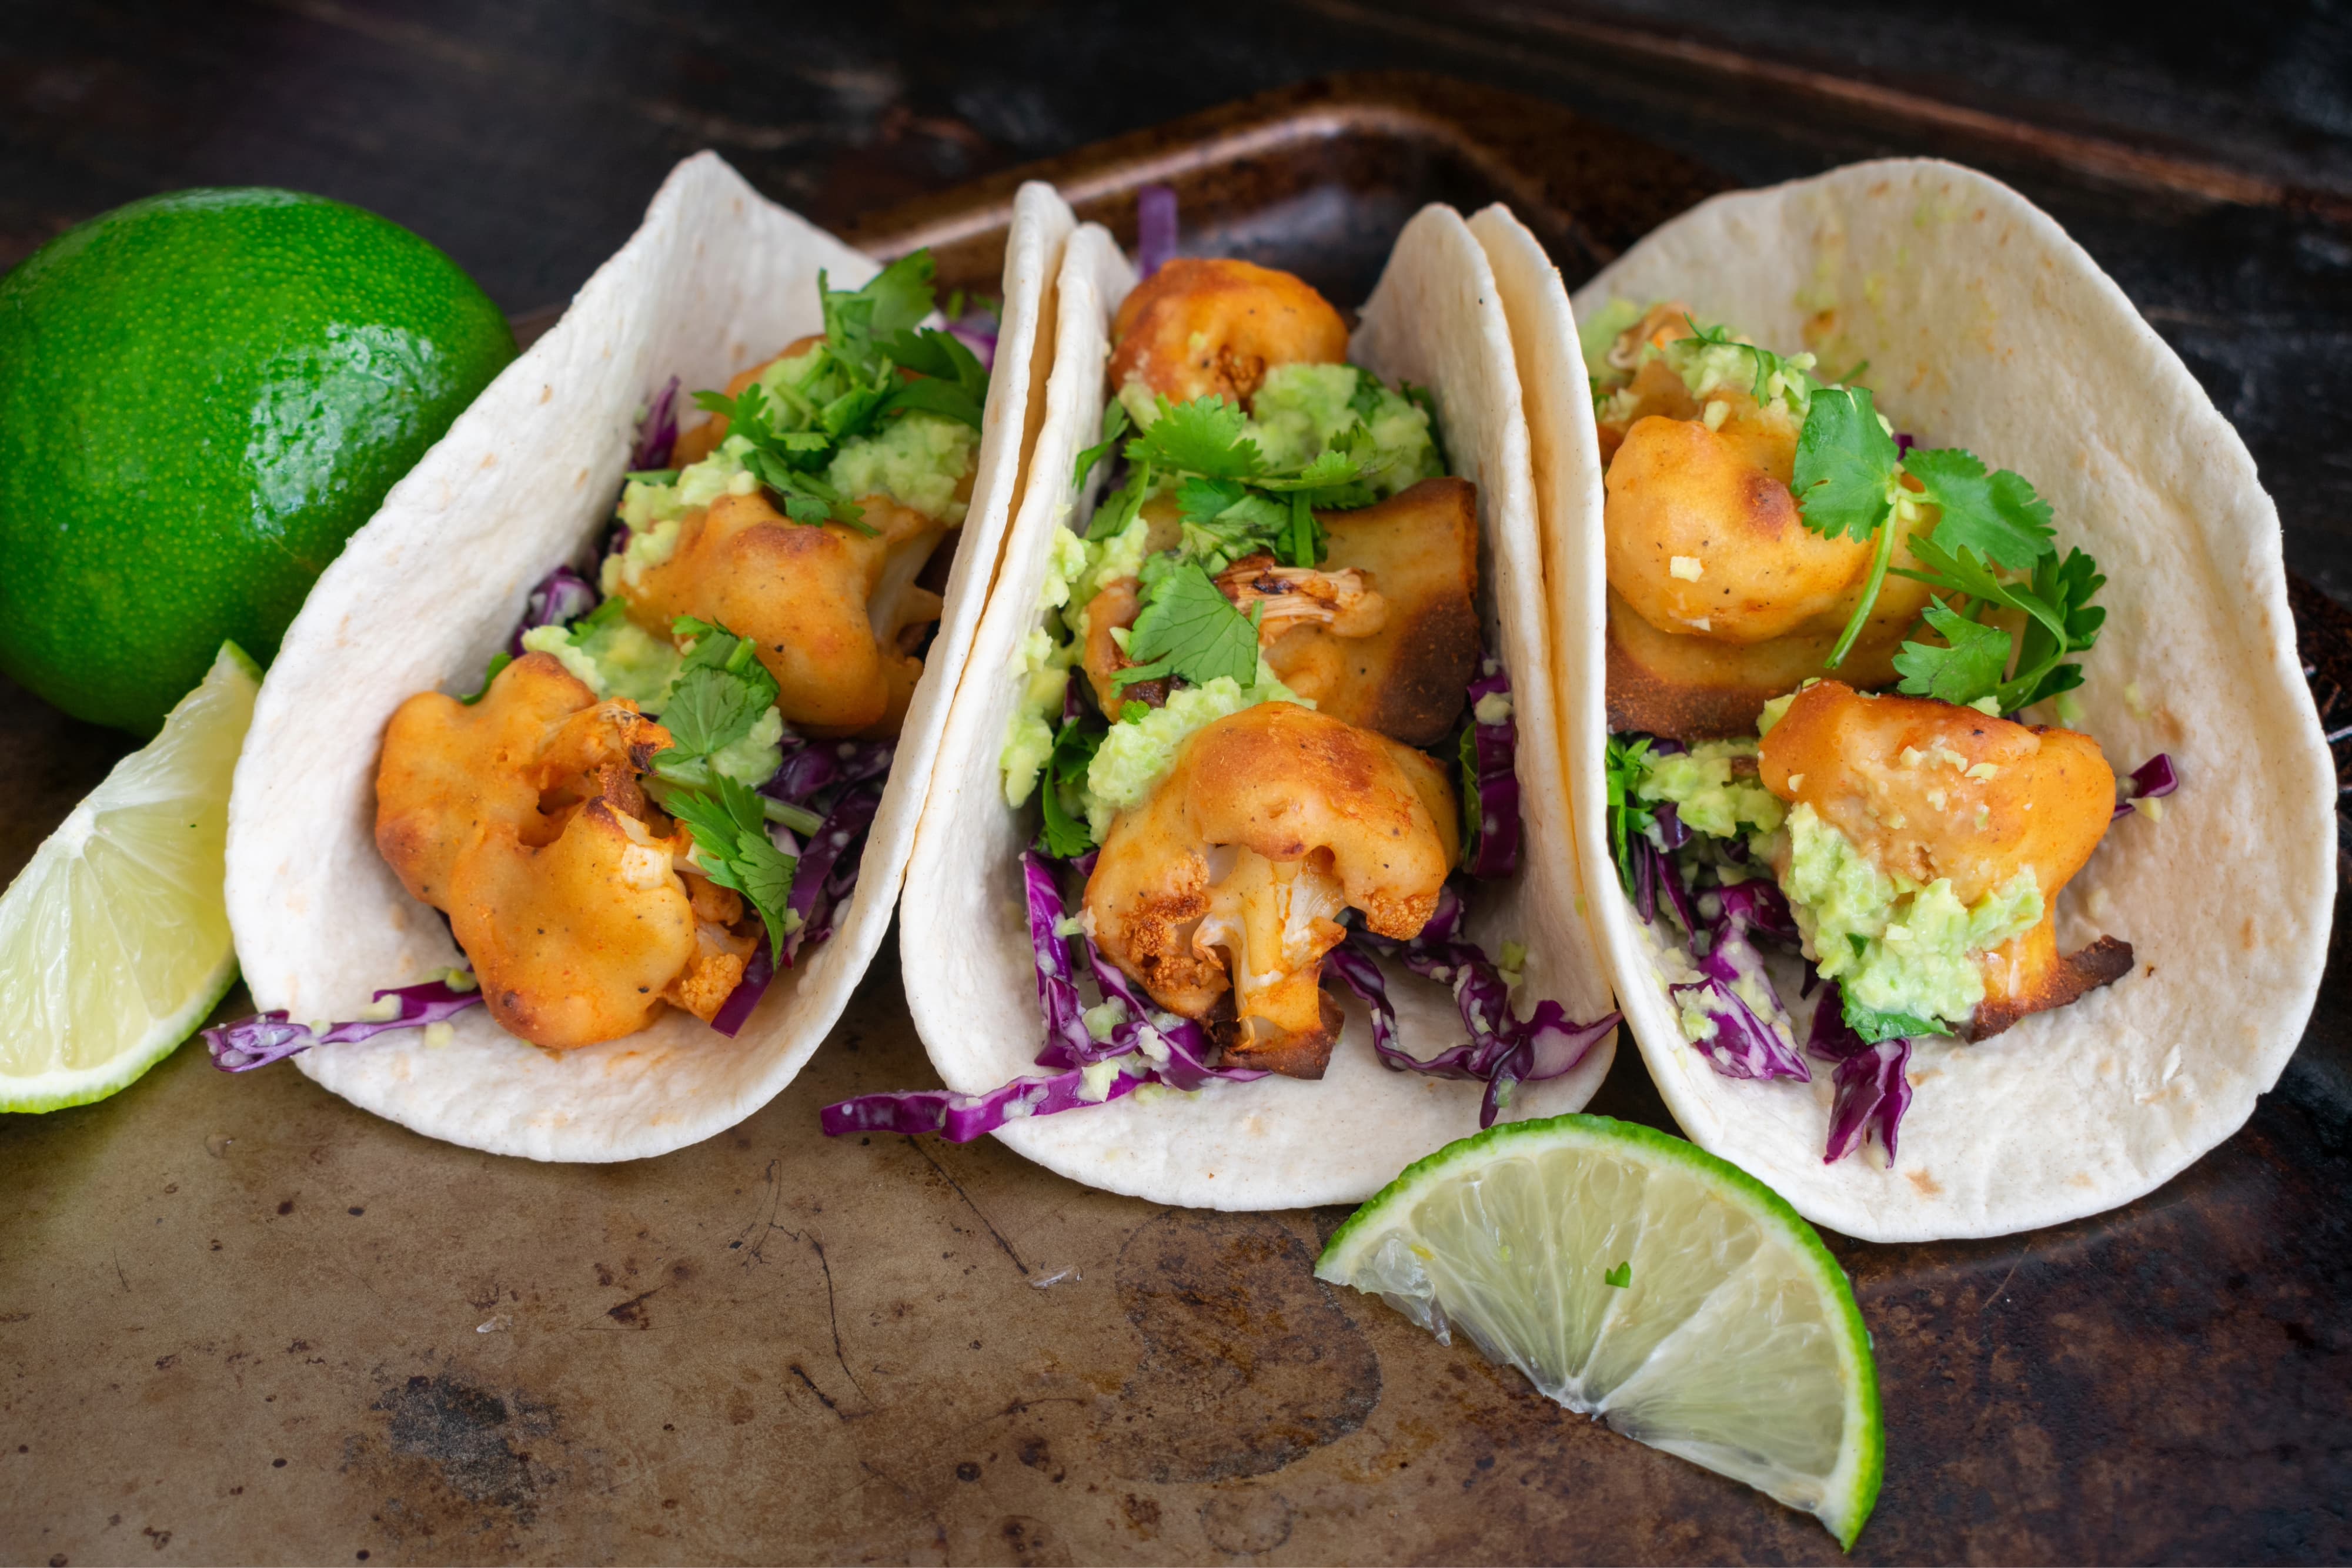 Vegetarian tacos made with spicy cauliflower, avocado crema, and shredded cabbage